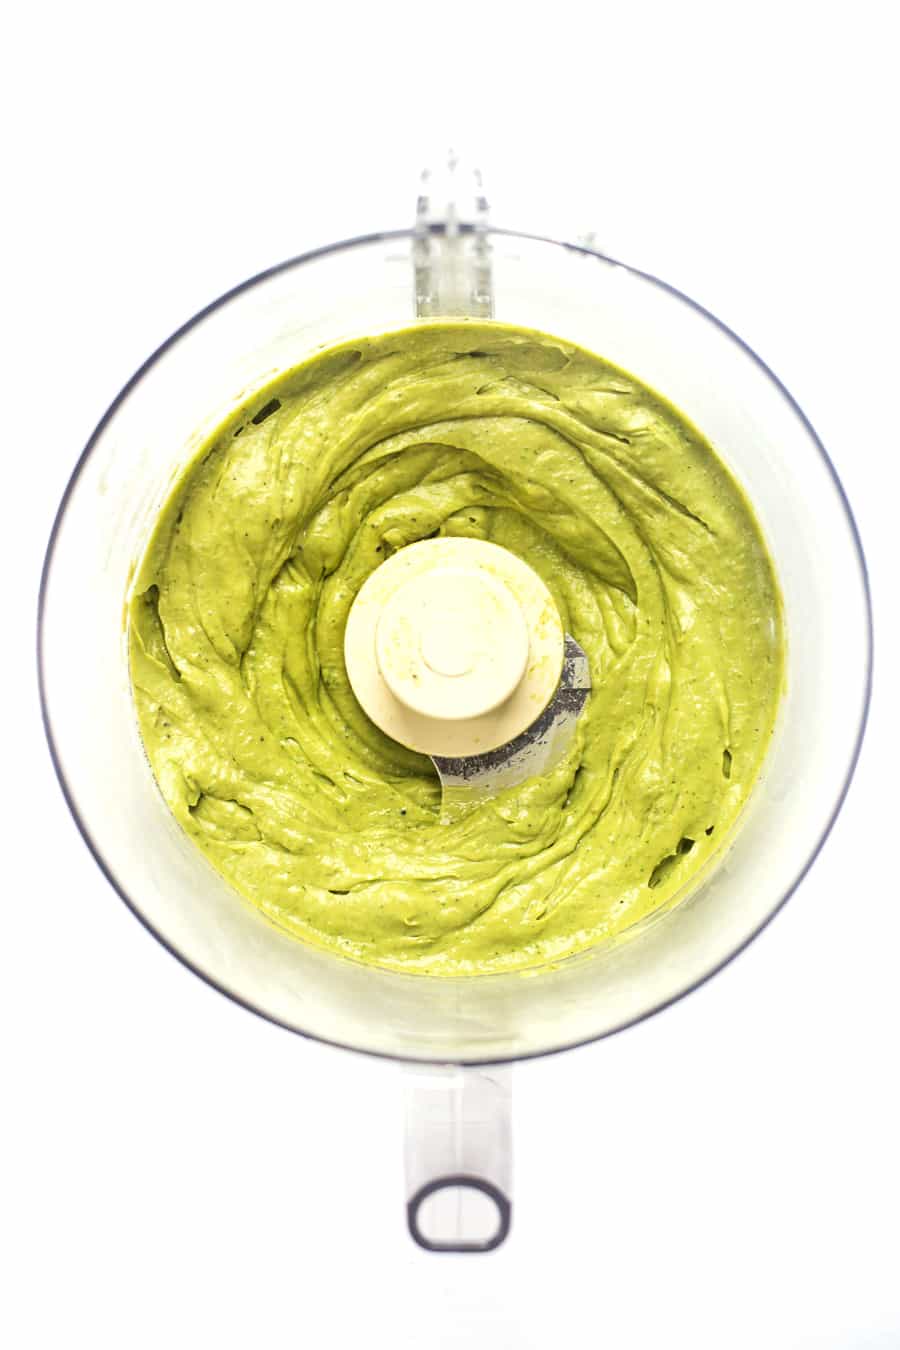 Super simply AVOCADO ALFREDO sauce to use for any pasta...including zucchini noodles!